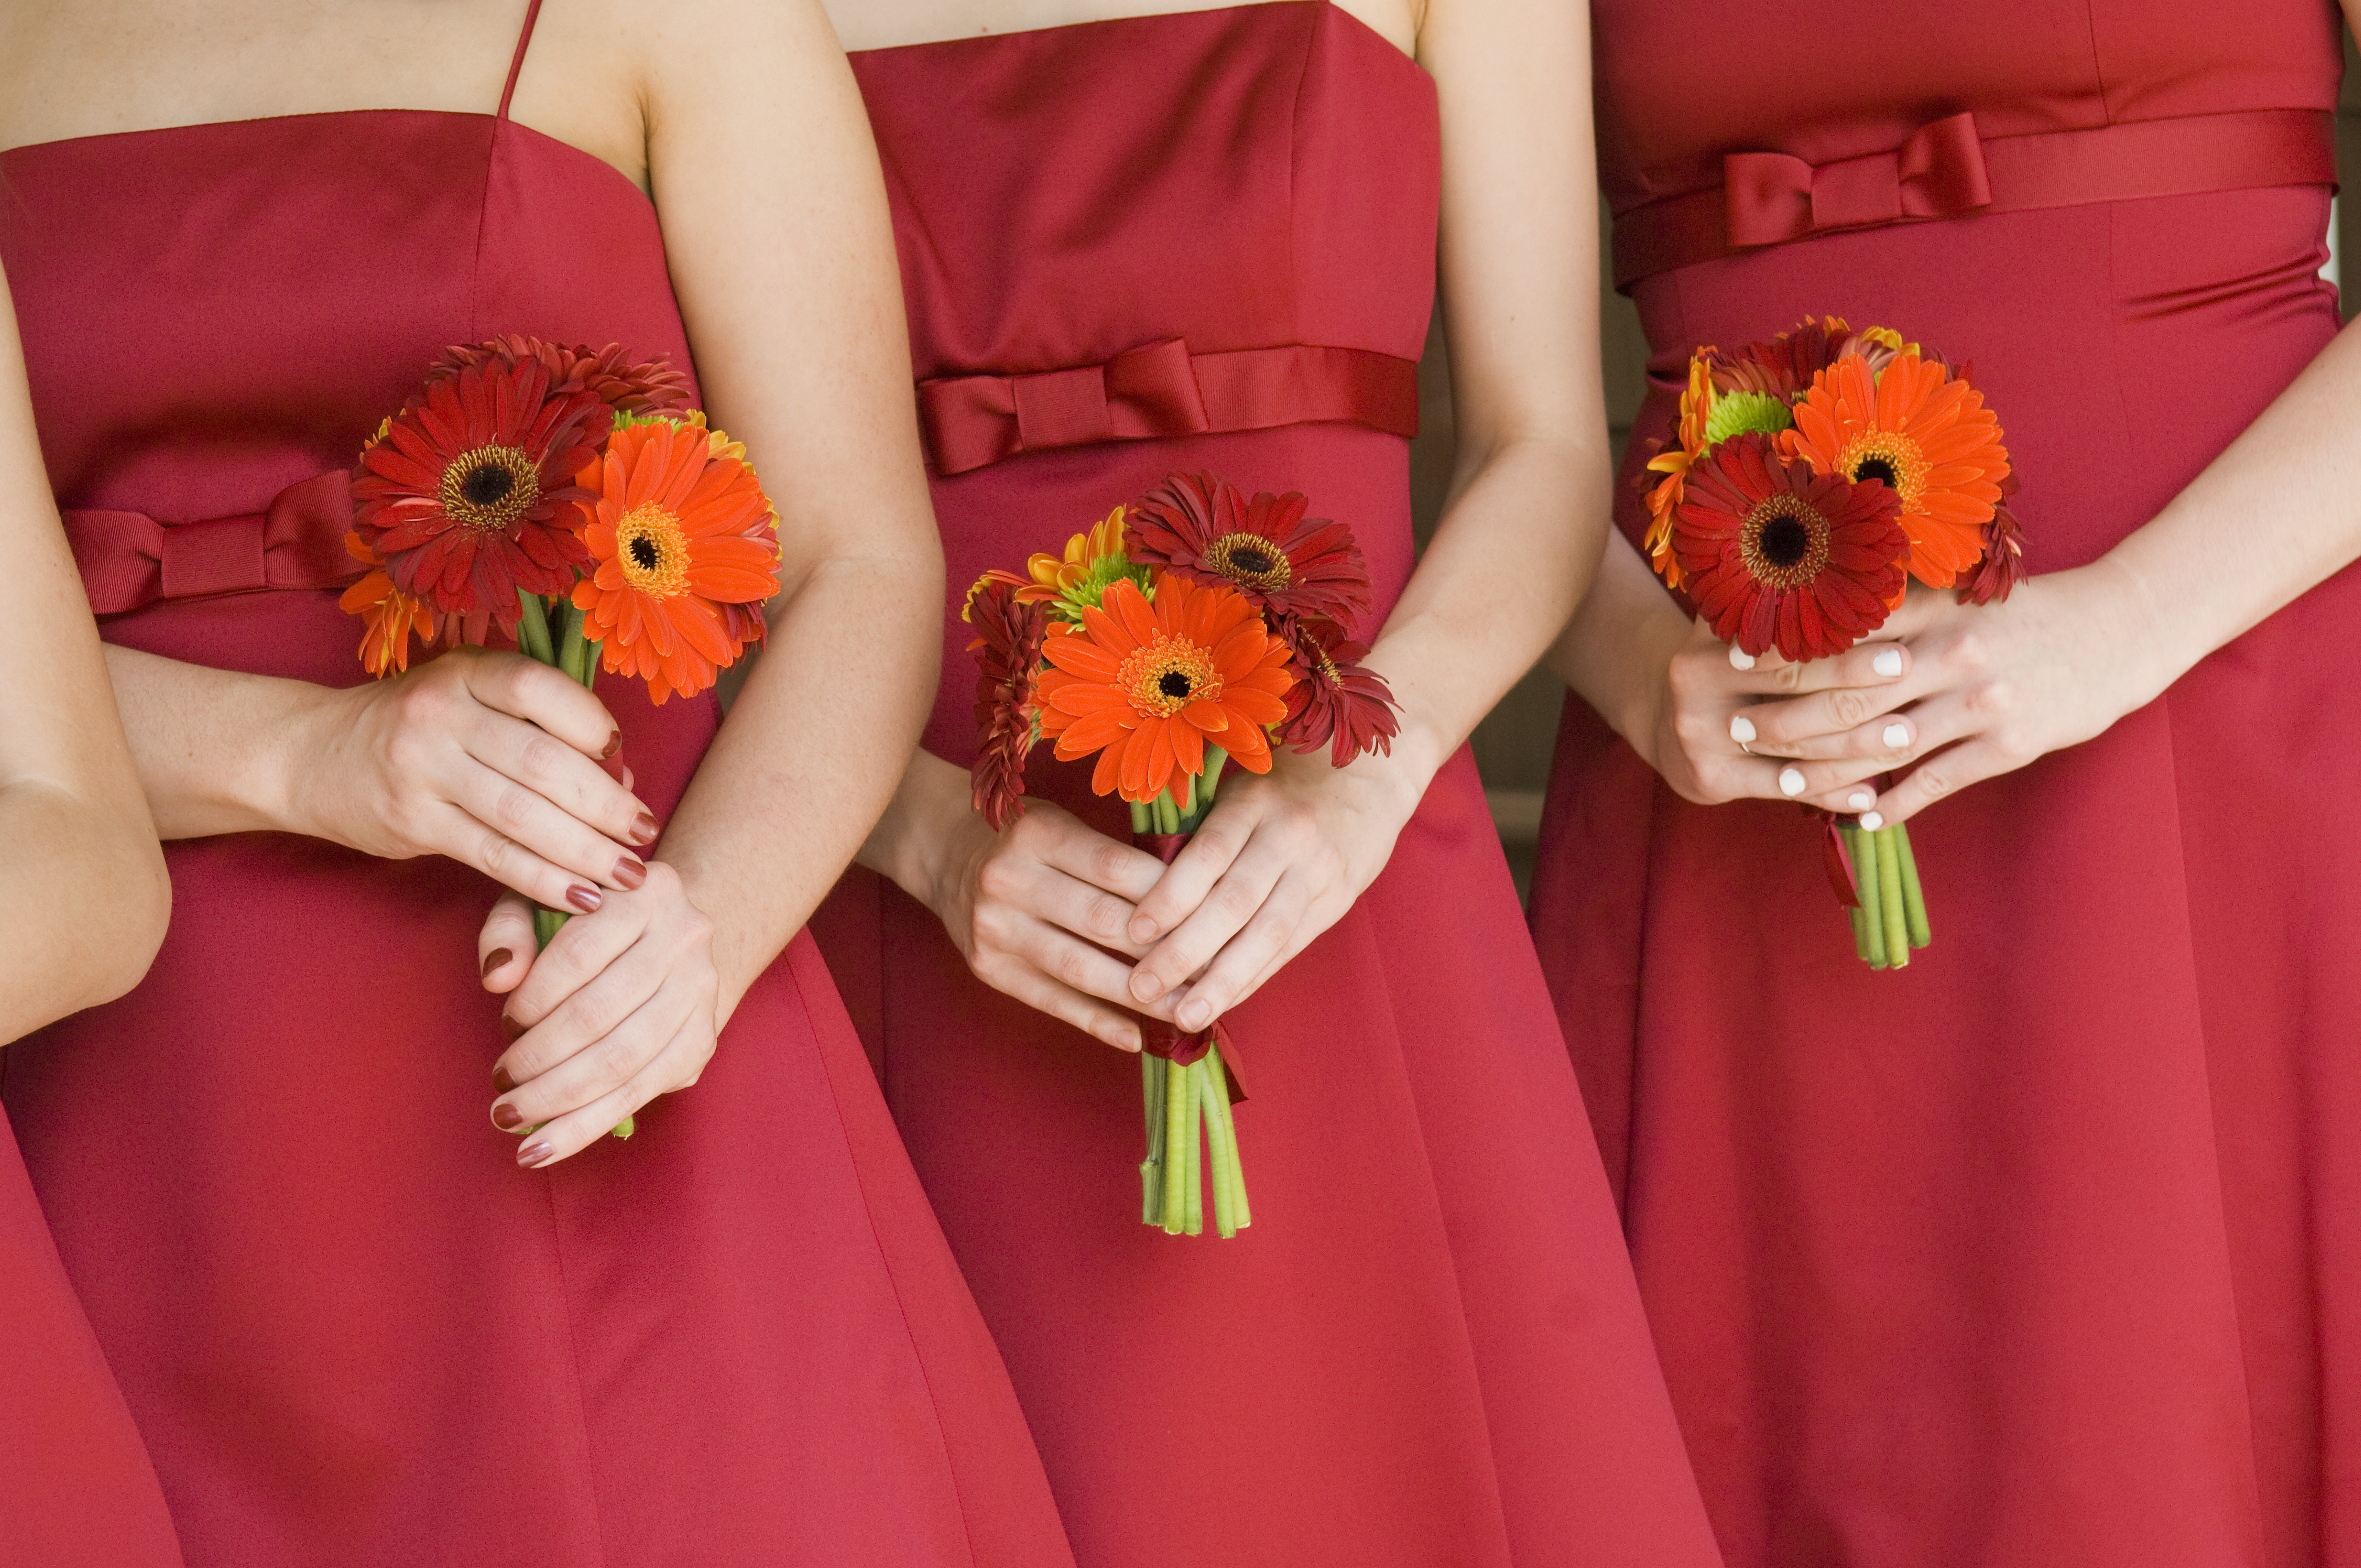 Bridesmaids in red dresses holding bouquets of Gerber daisies. | Source: Shutterstock